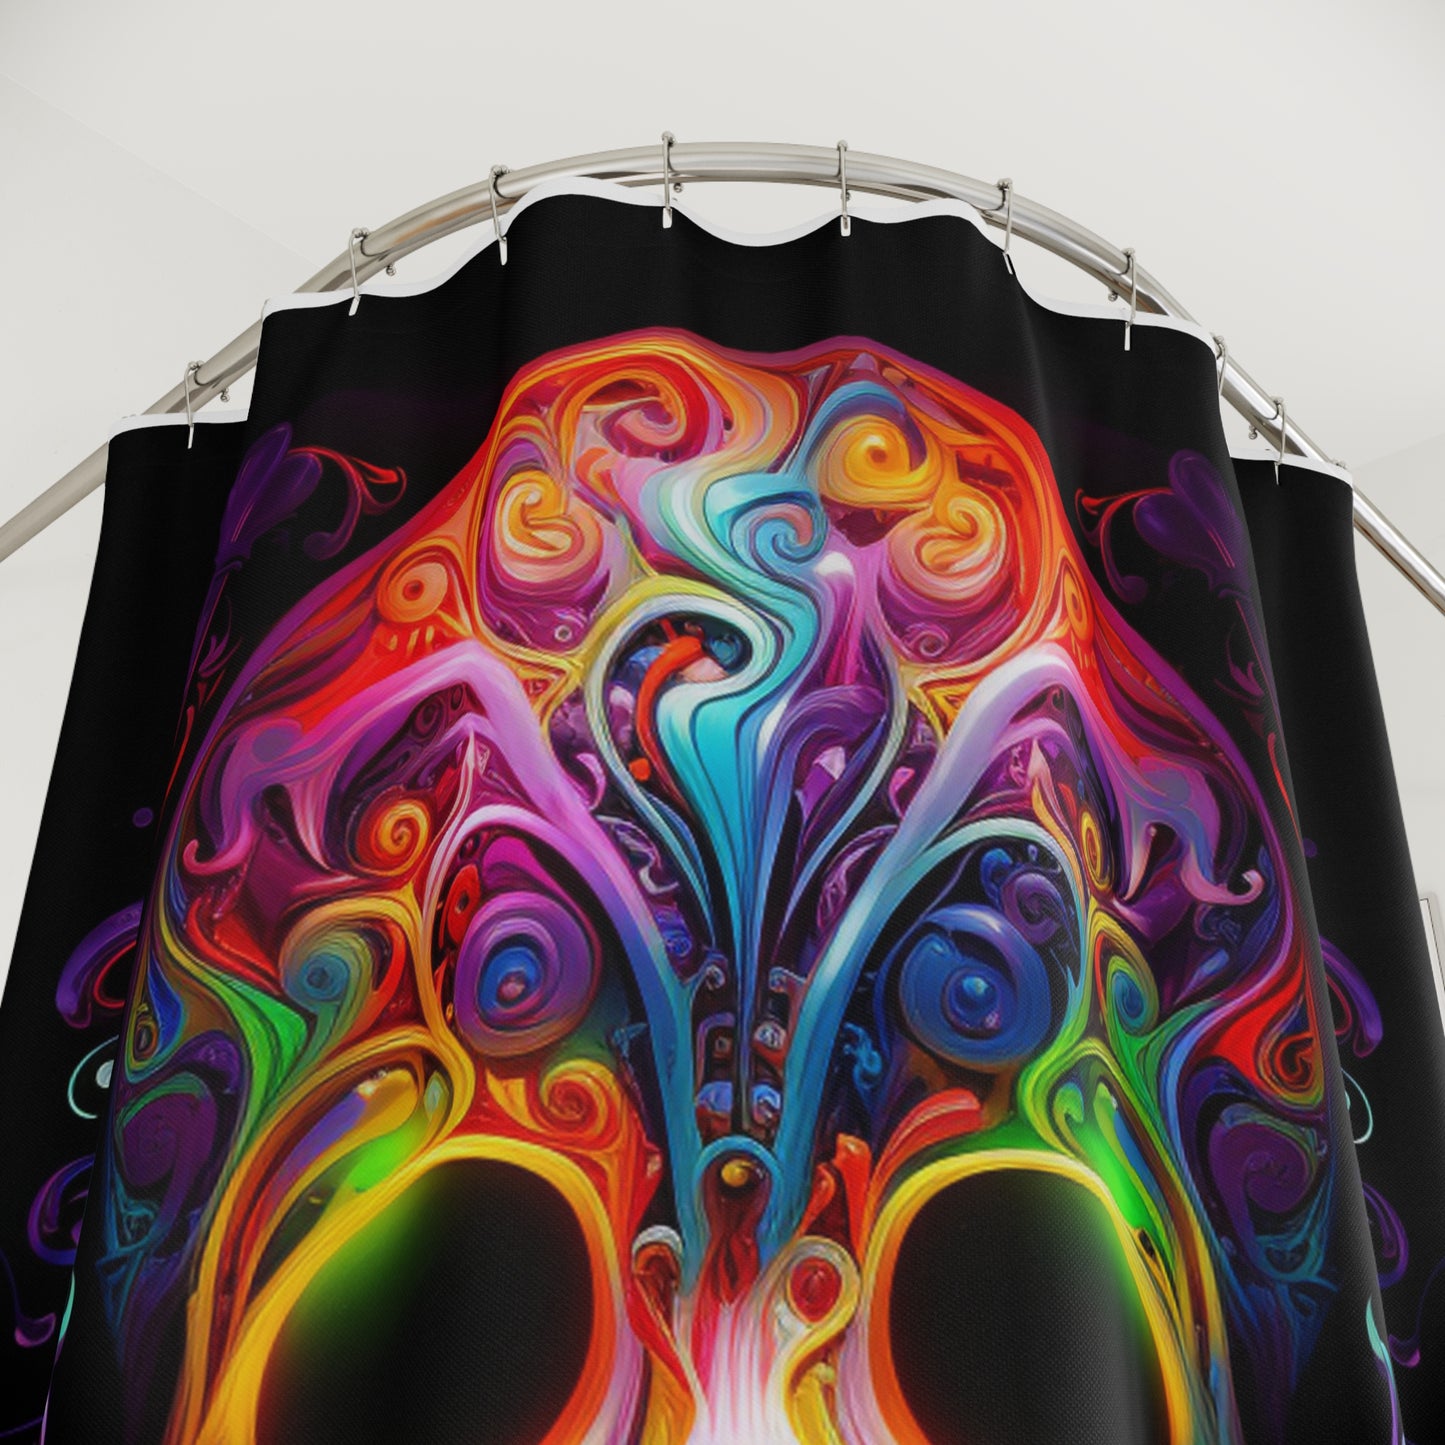 Polyester Shower Curtain Macro Skull Color 2